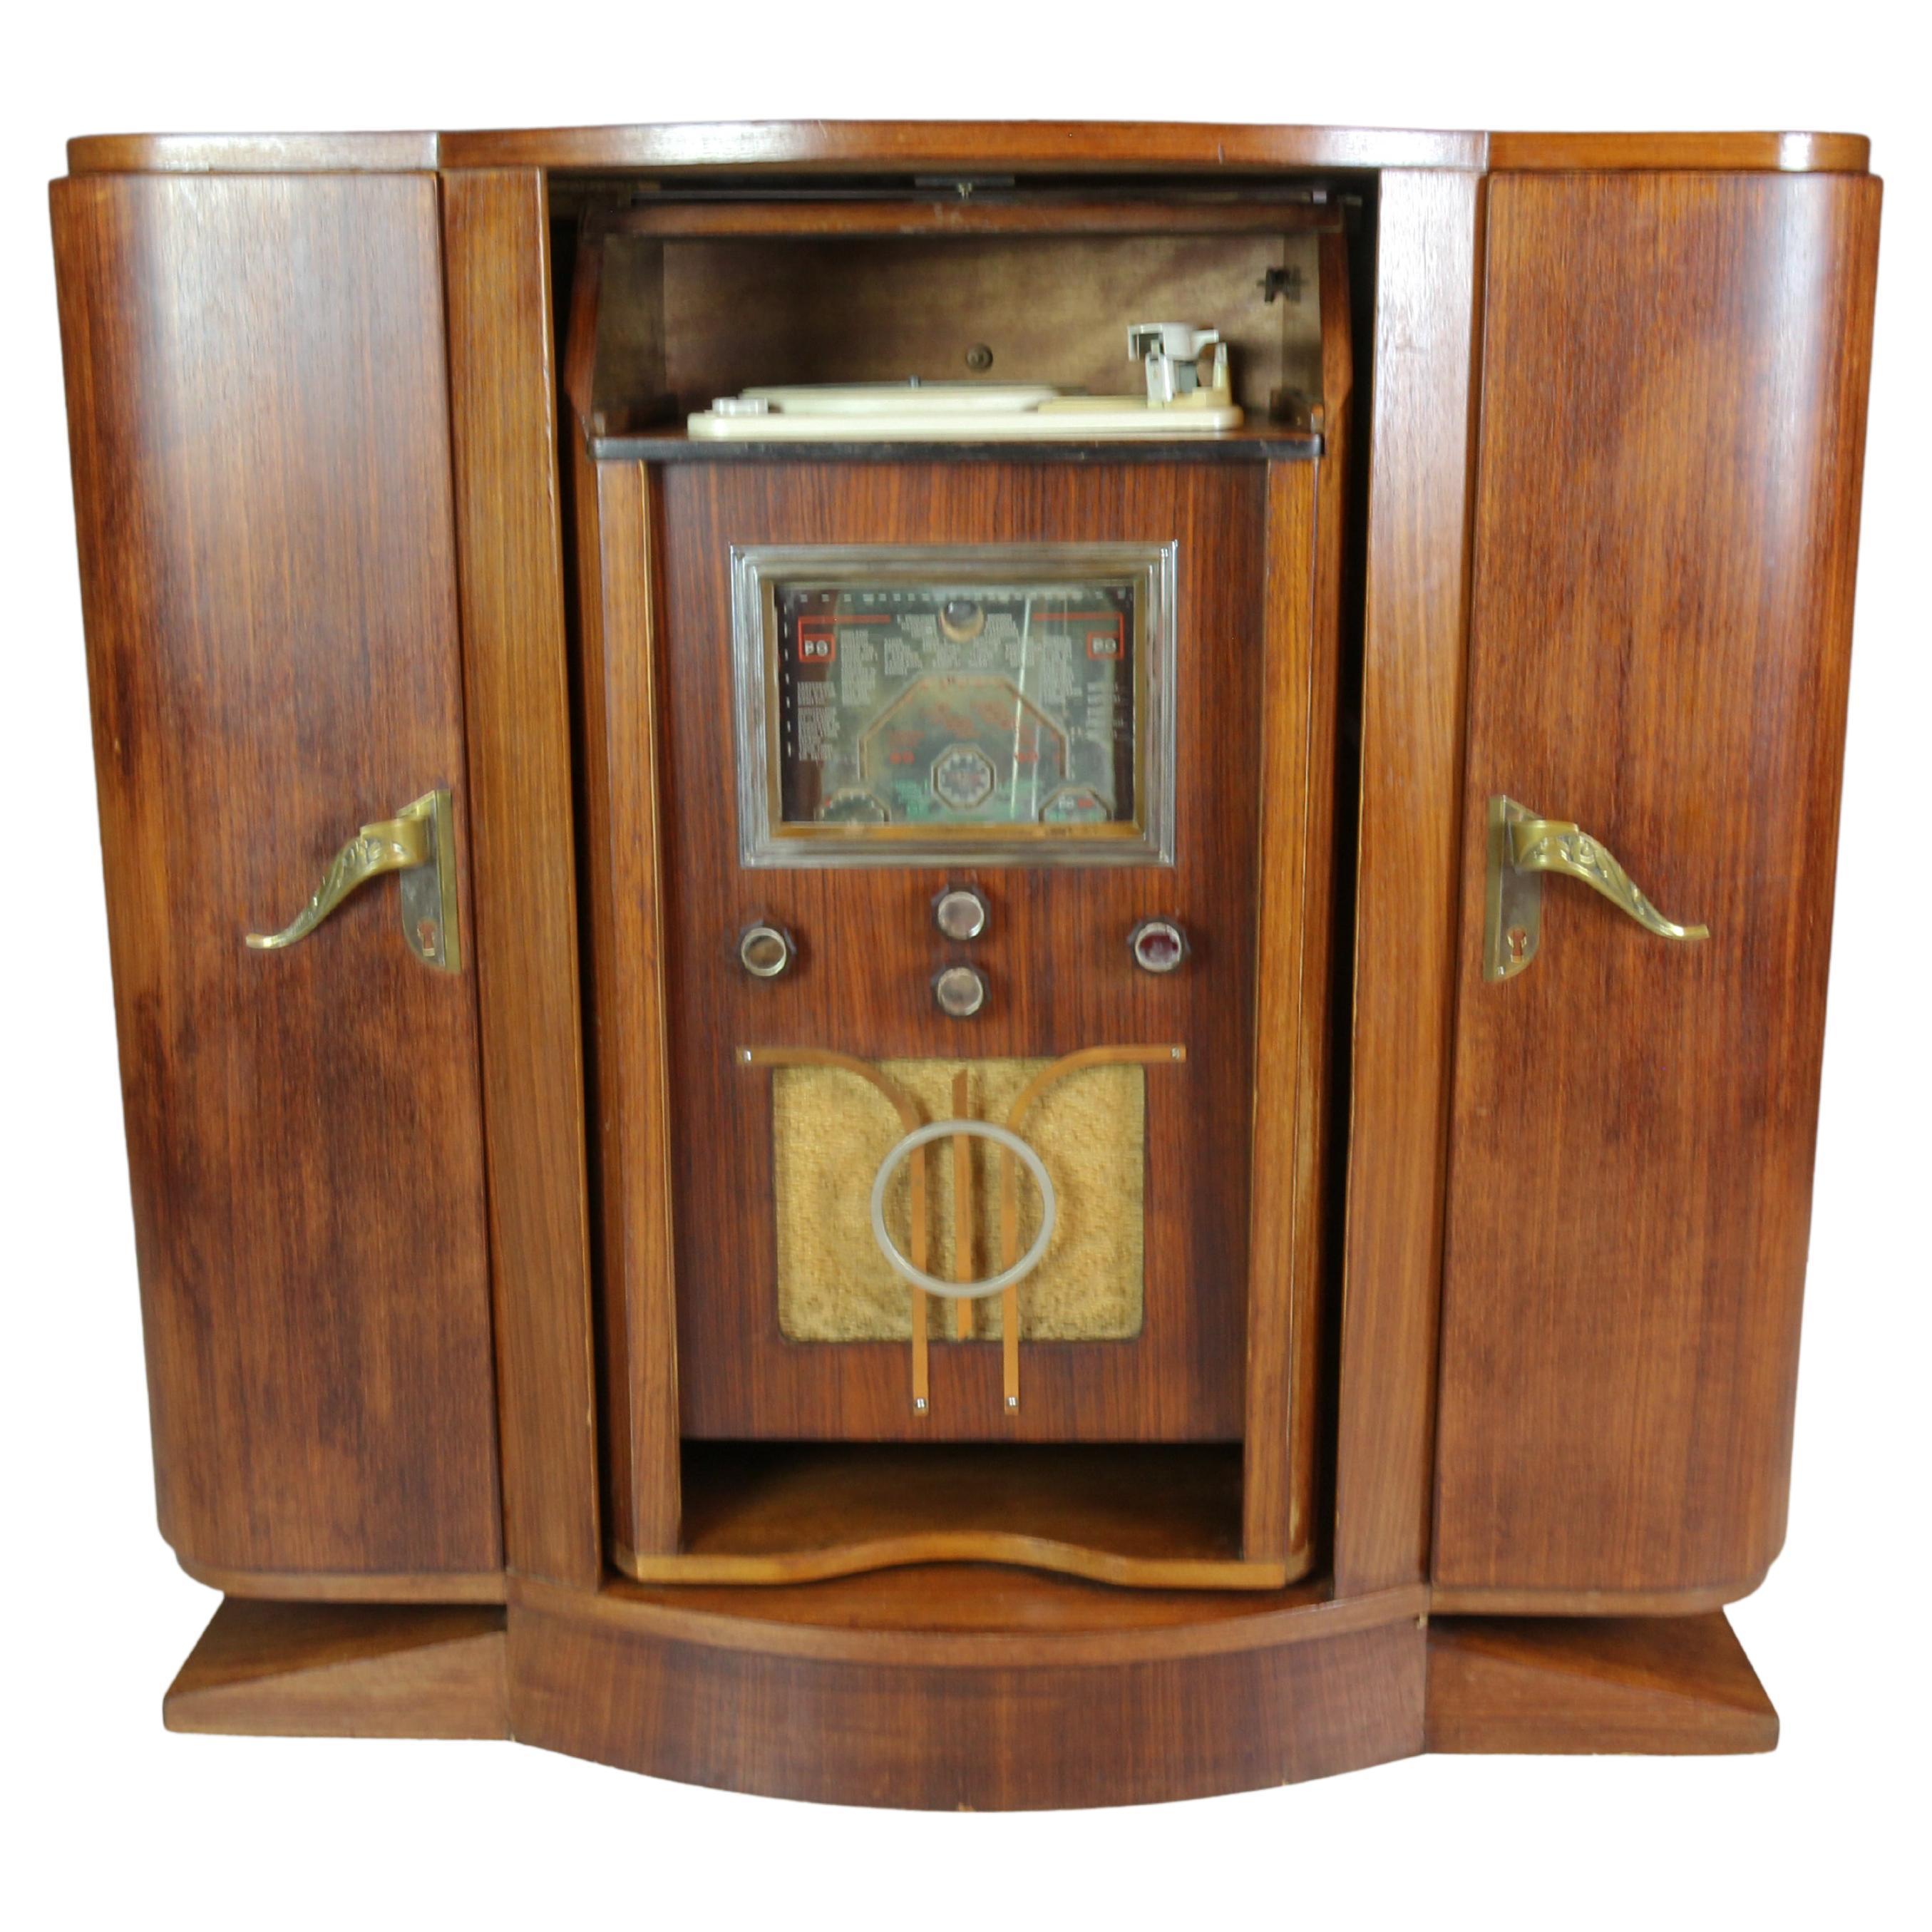 French Art Deco Sideboard with Radio and Record Player, 1930s